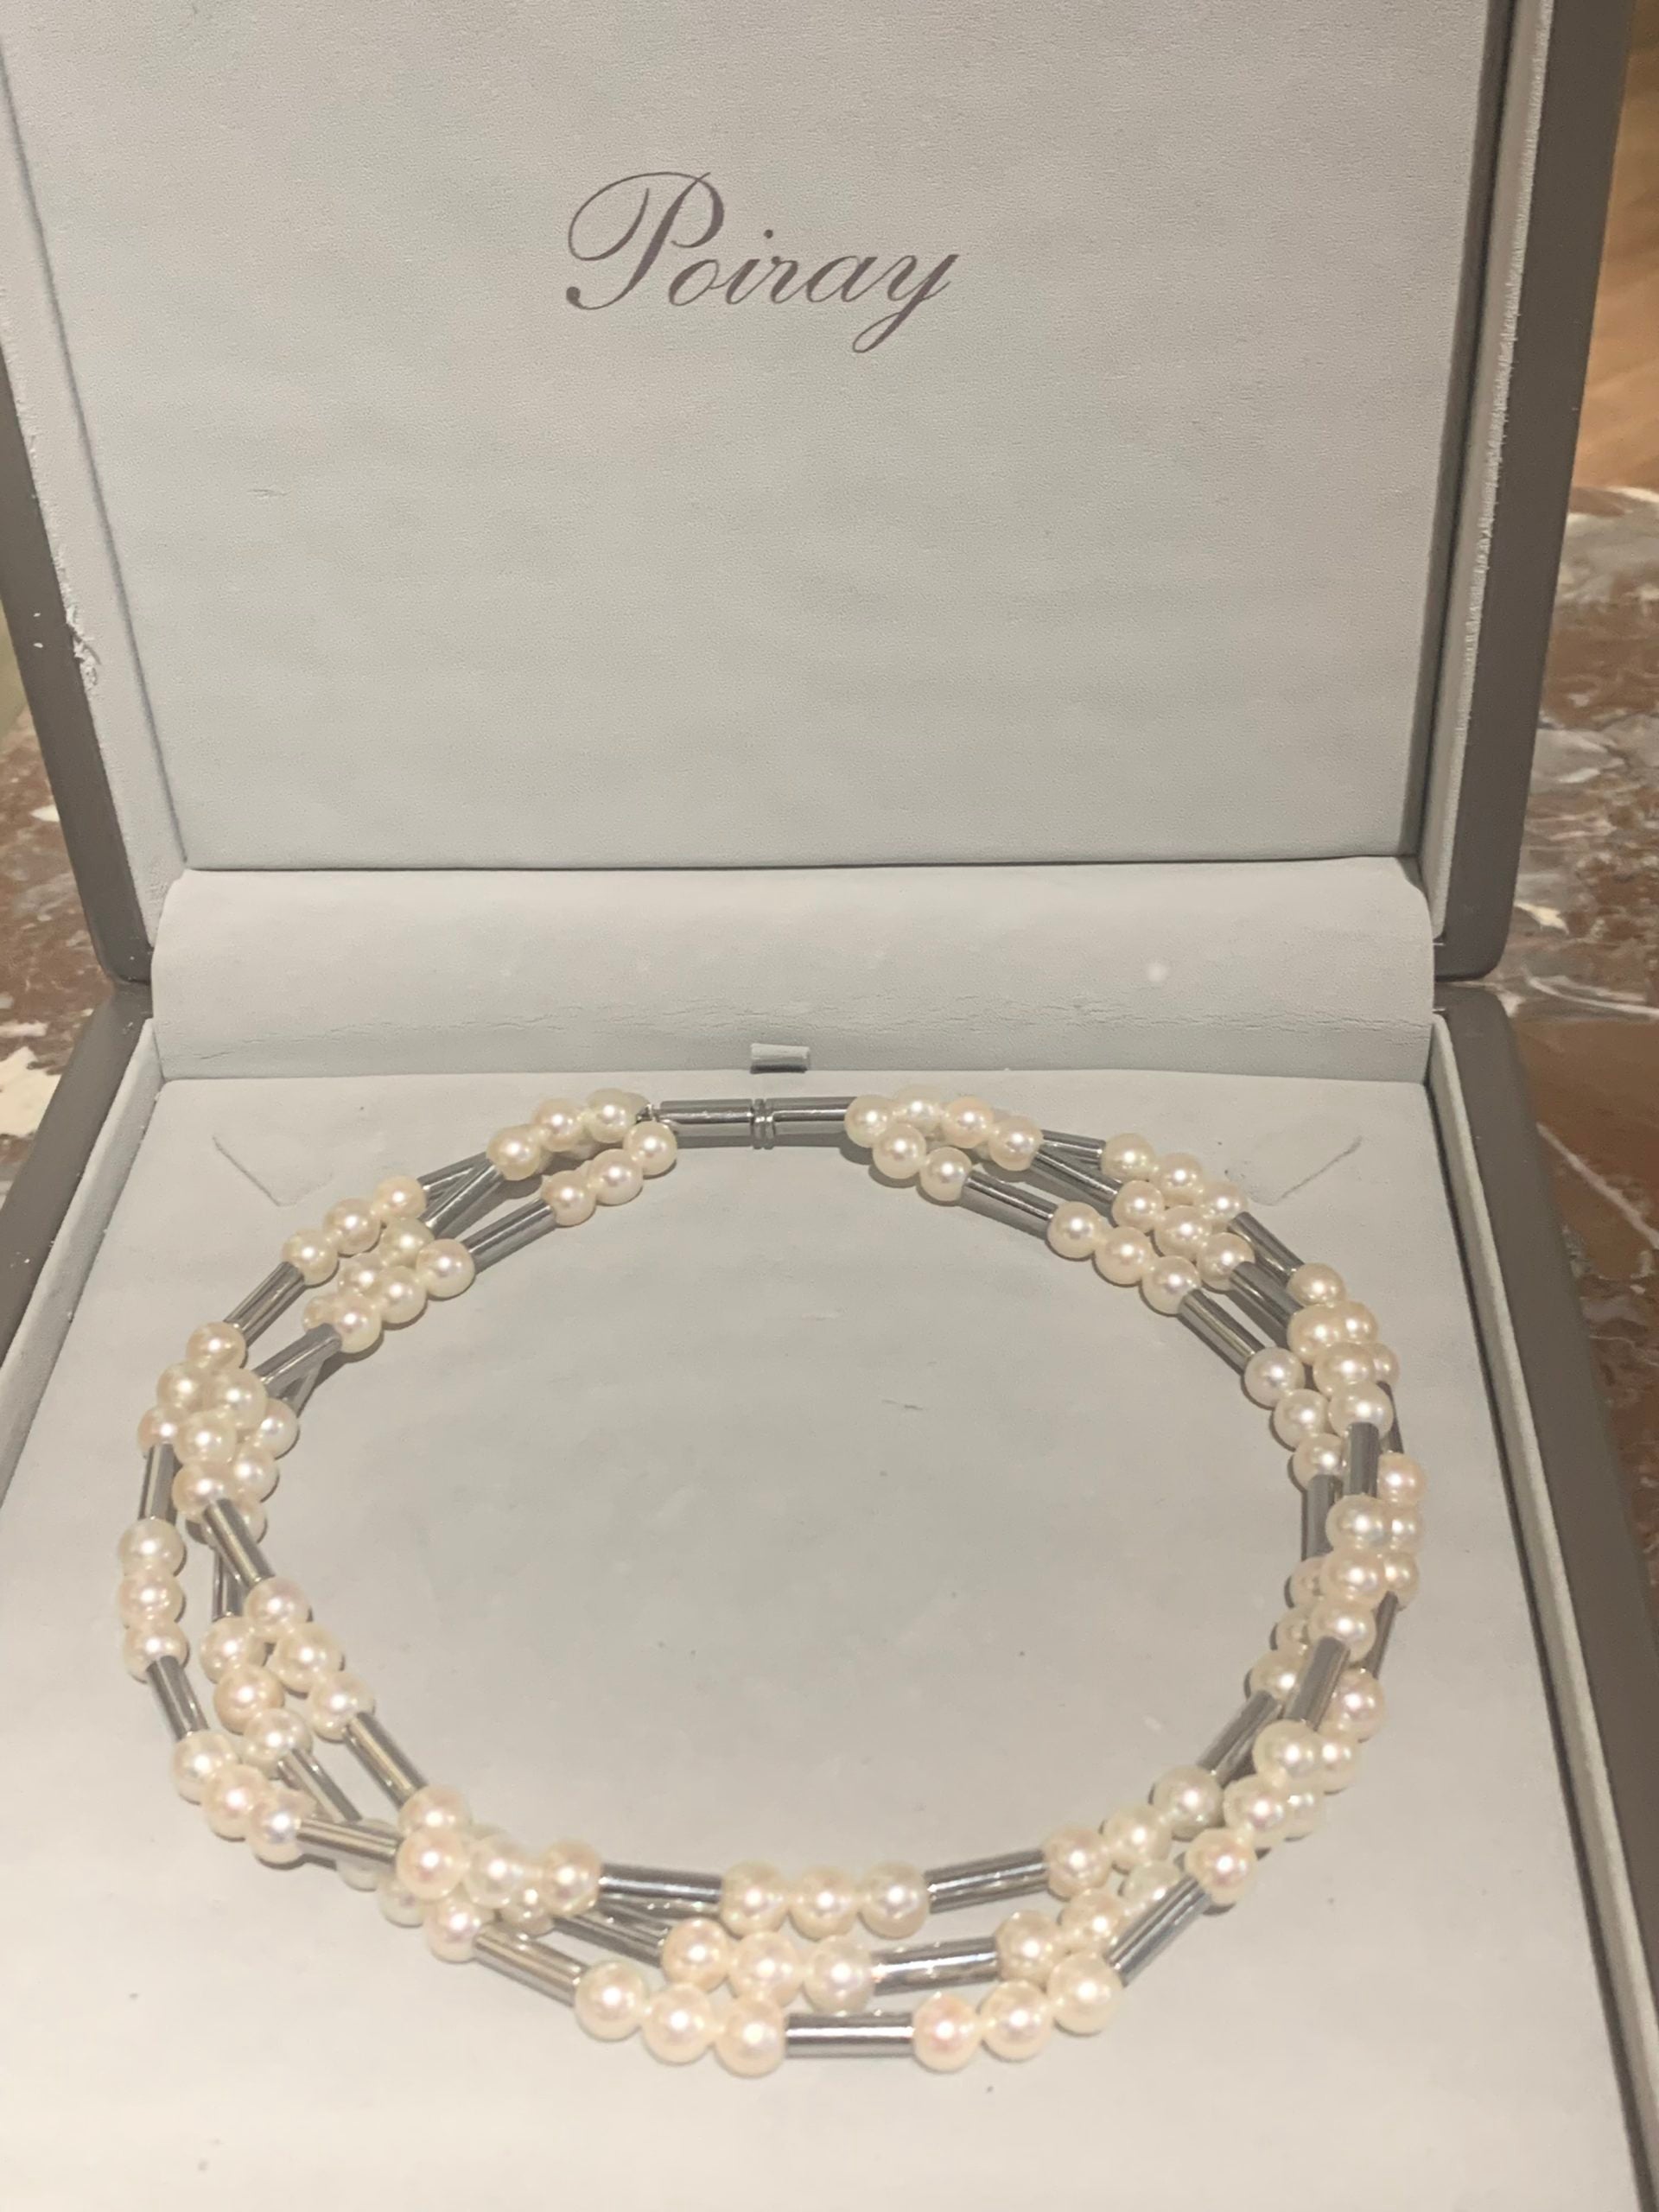 Poiray Roseau Akoyas Pearls 18 Carats White Gold Necklace